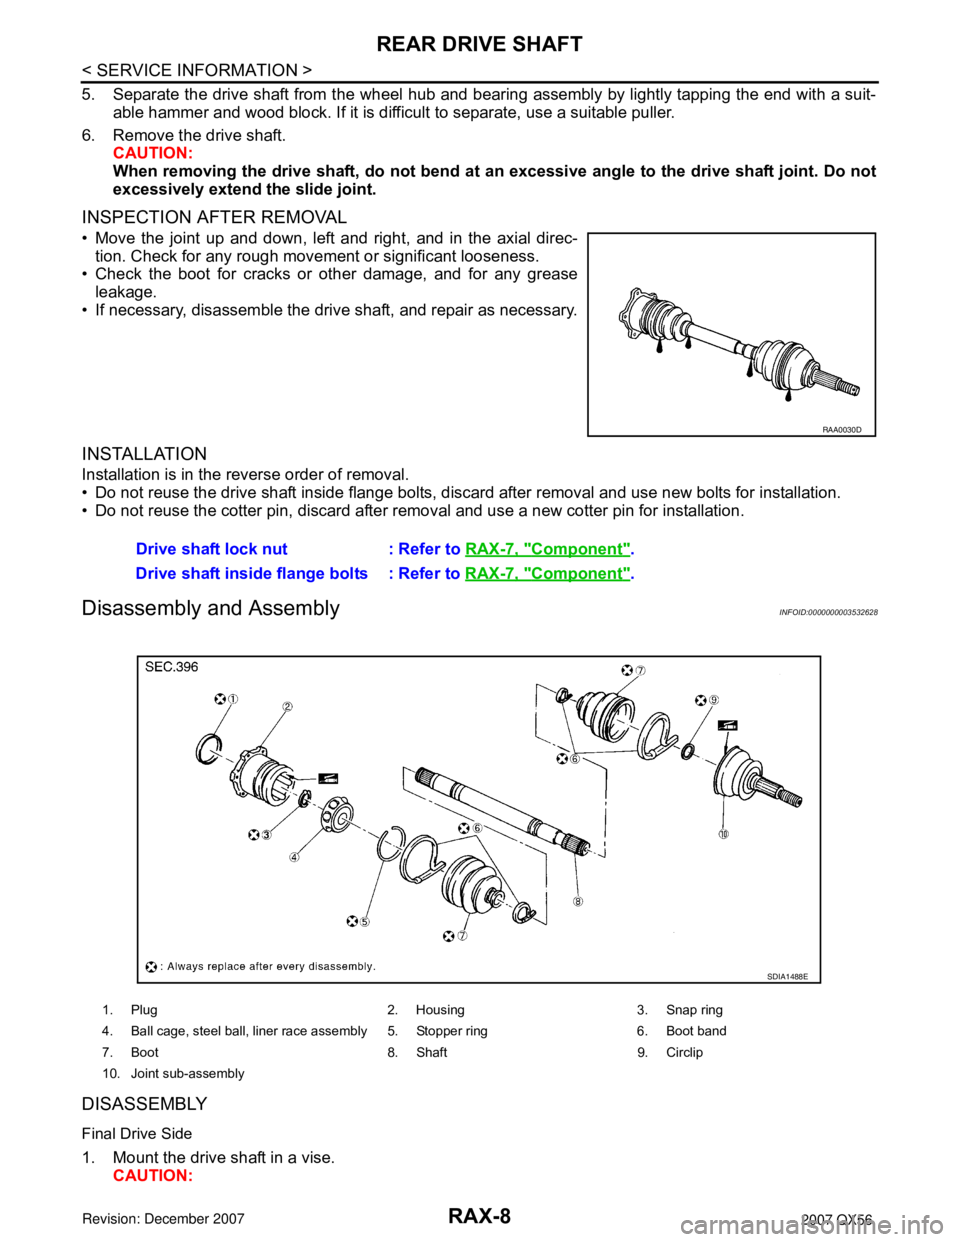 INFINITI QX56 2007  Factory User Guide RAX-8
< SERVICE INFORMATION >
REAR DRIVE SHAFT
5. Separate the drive shaft from the wheel hub and bearing assembly by lightly tapping the end with a suit-
able hammer and wood block. If it is difficul